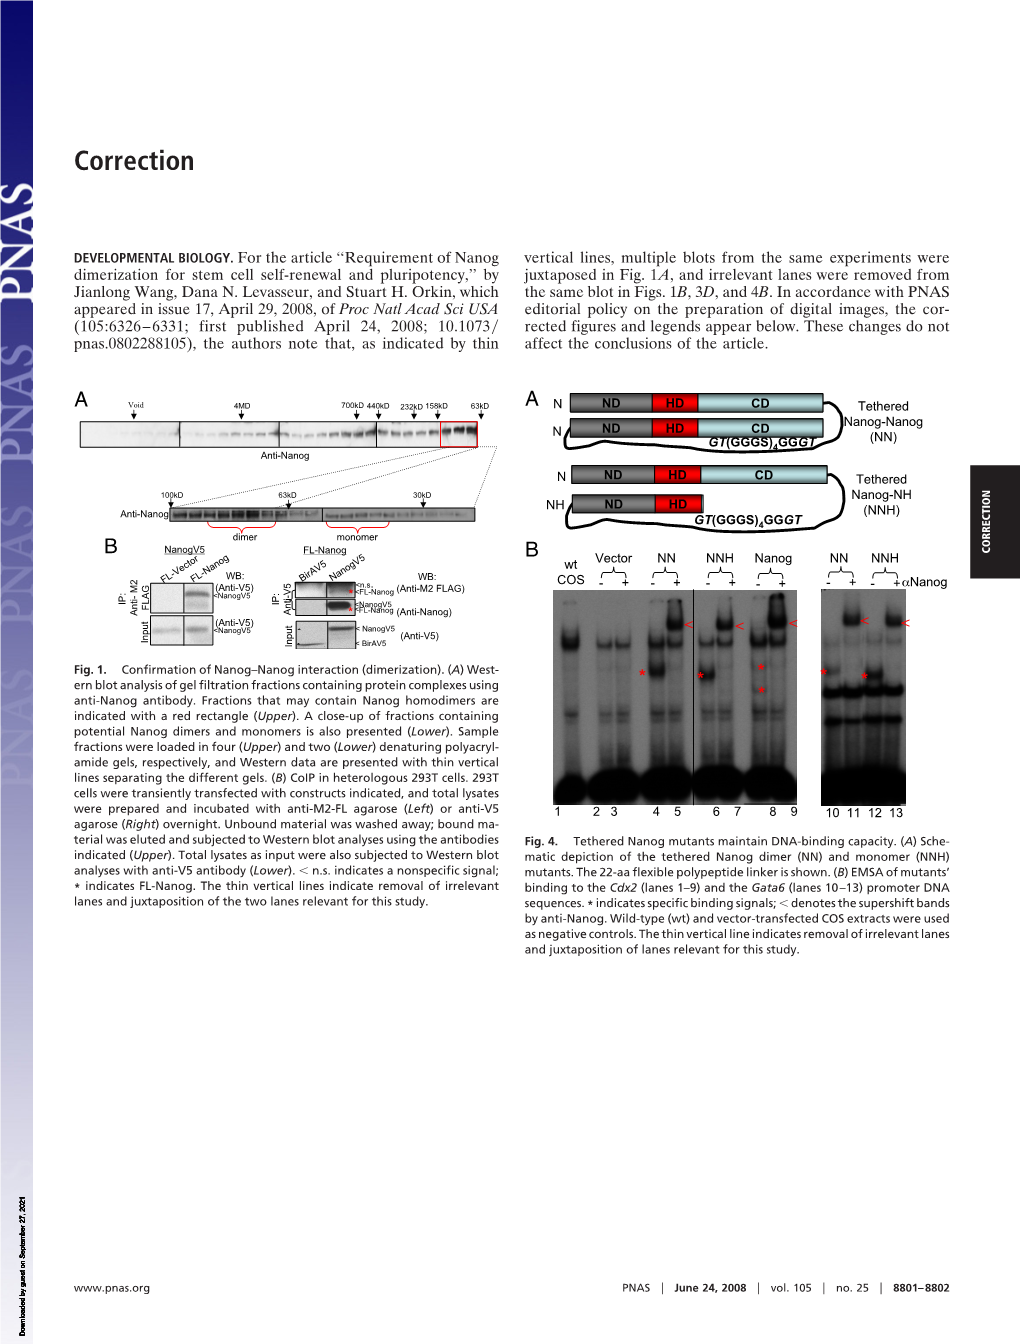 Requirement of Nanog Dimerization for Stem Cell Self-Renewal and Pluripotency